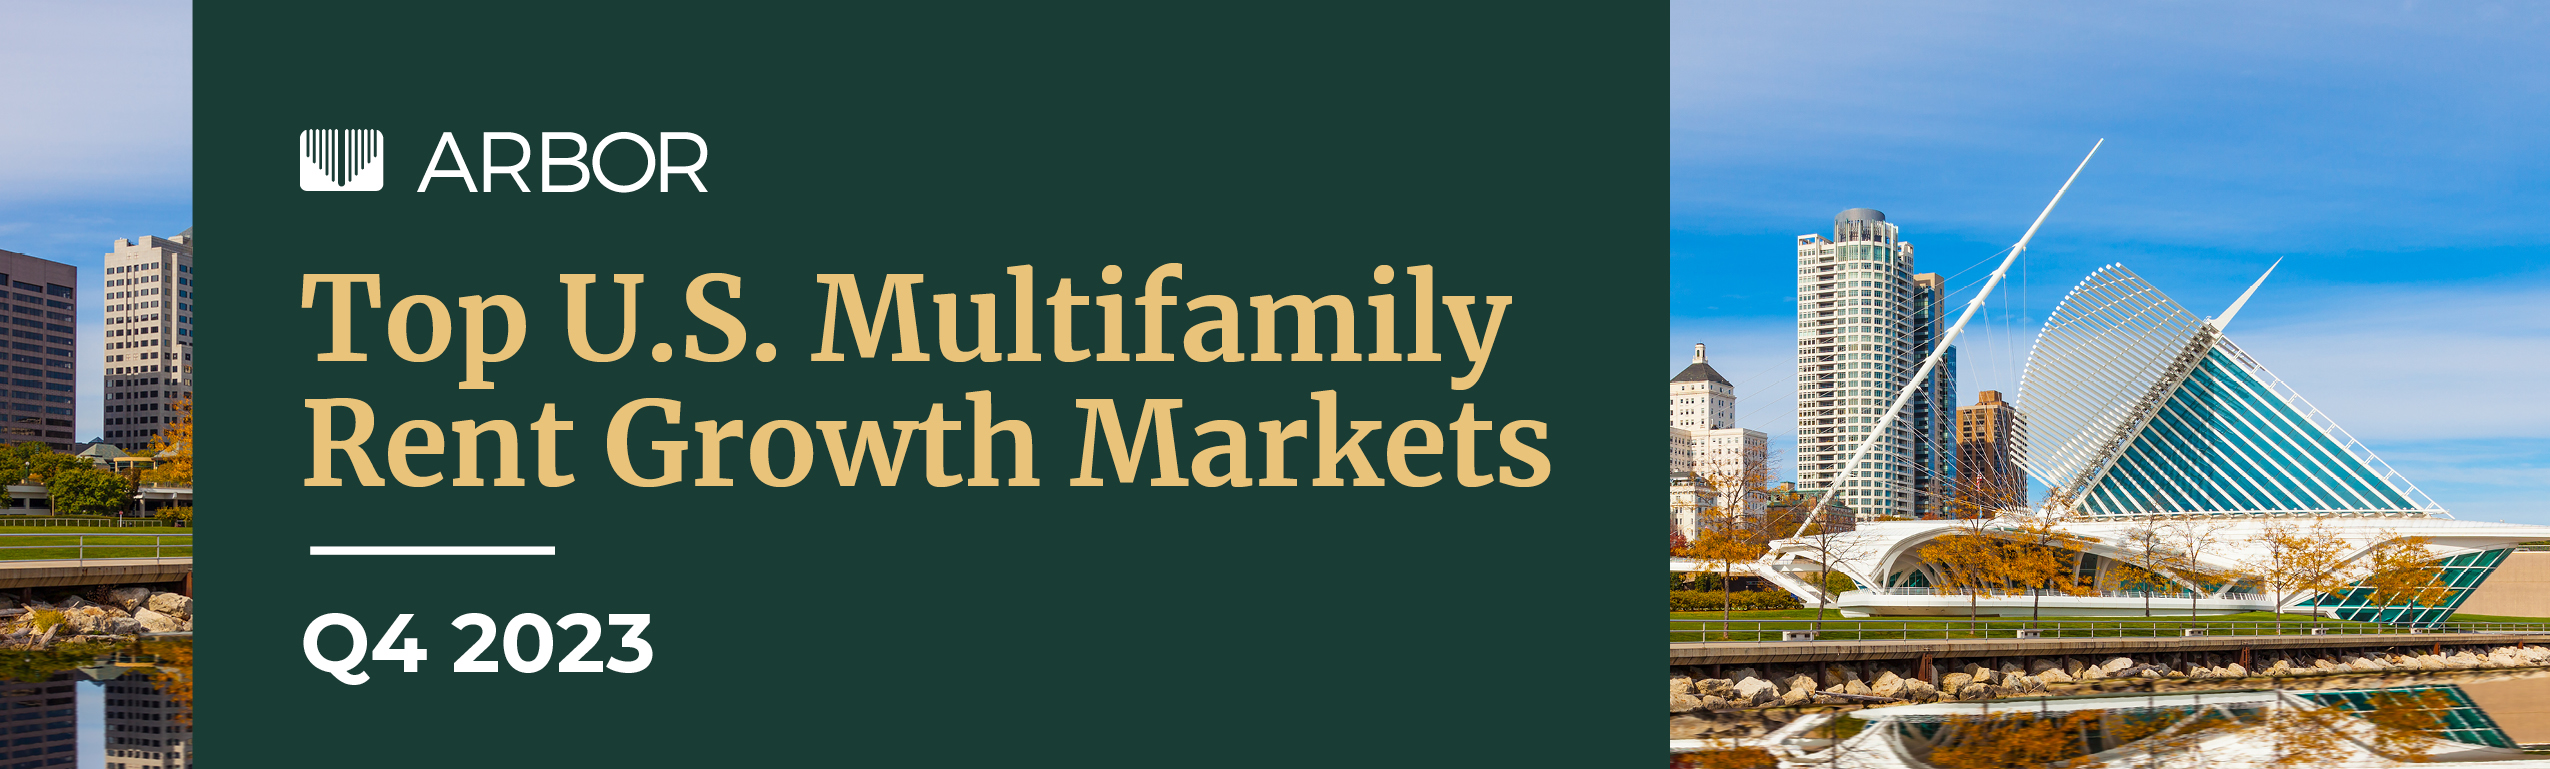 Top U.S. Multifamily Rent Growth Markets — Q4 2023